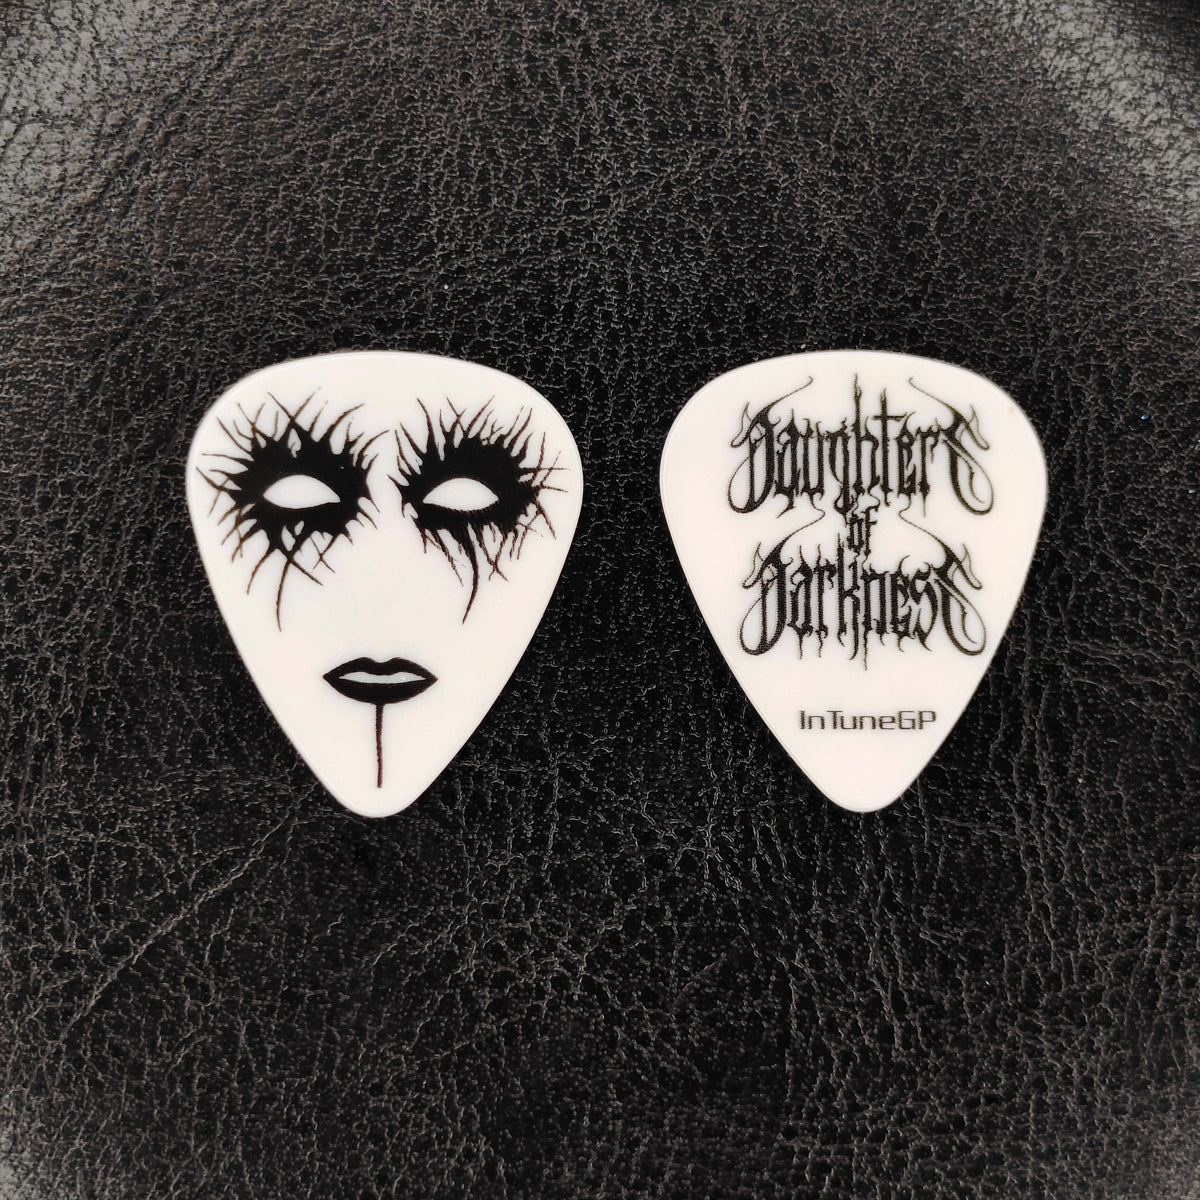 Daughters of Darkness - Neville - Guitar Pick